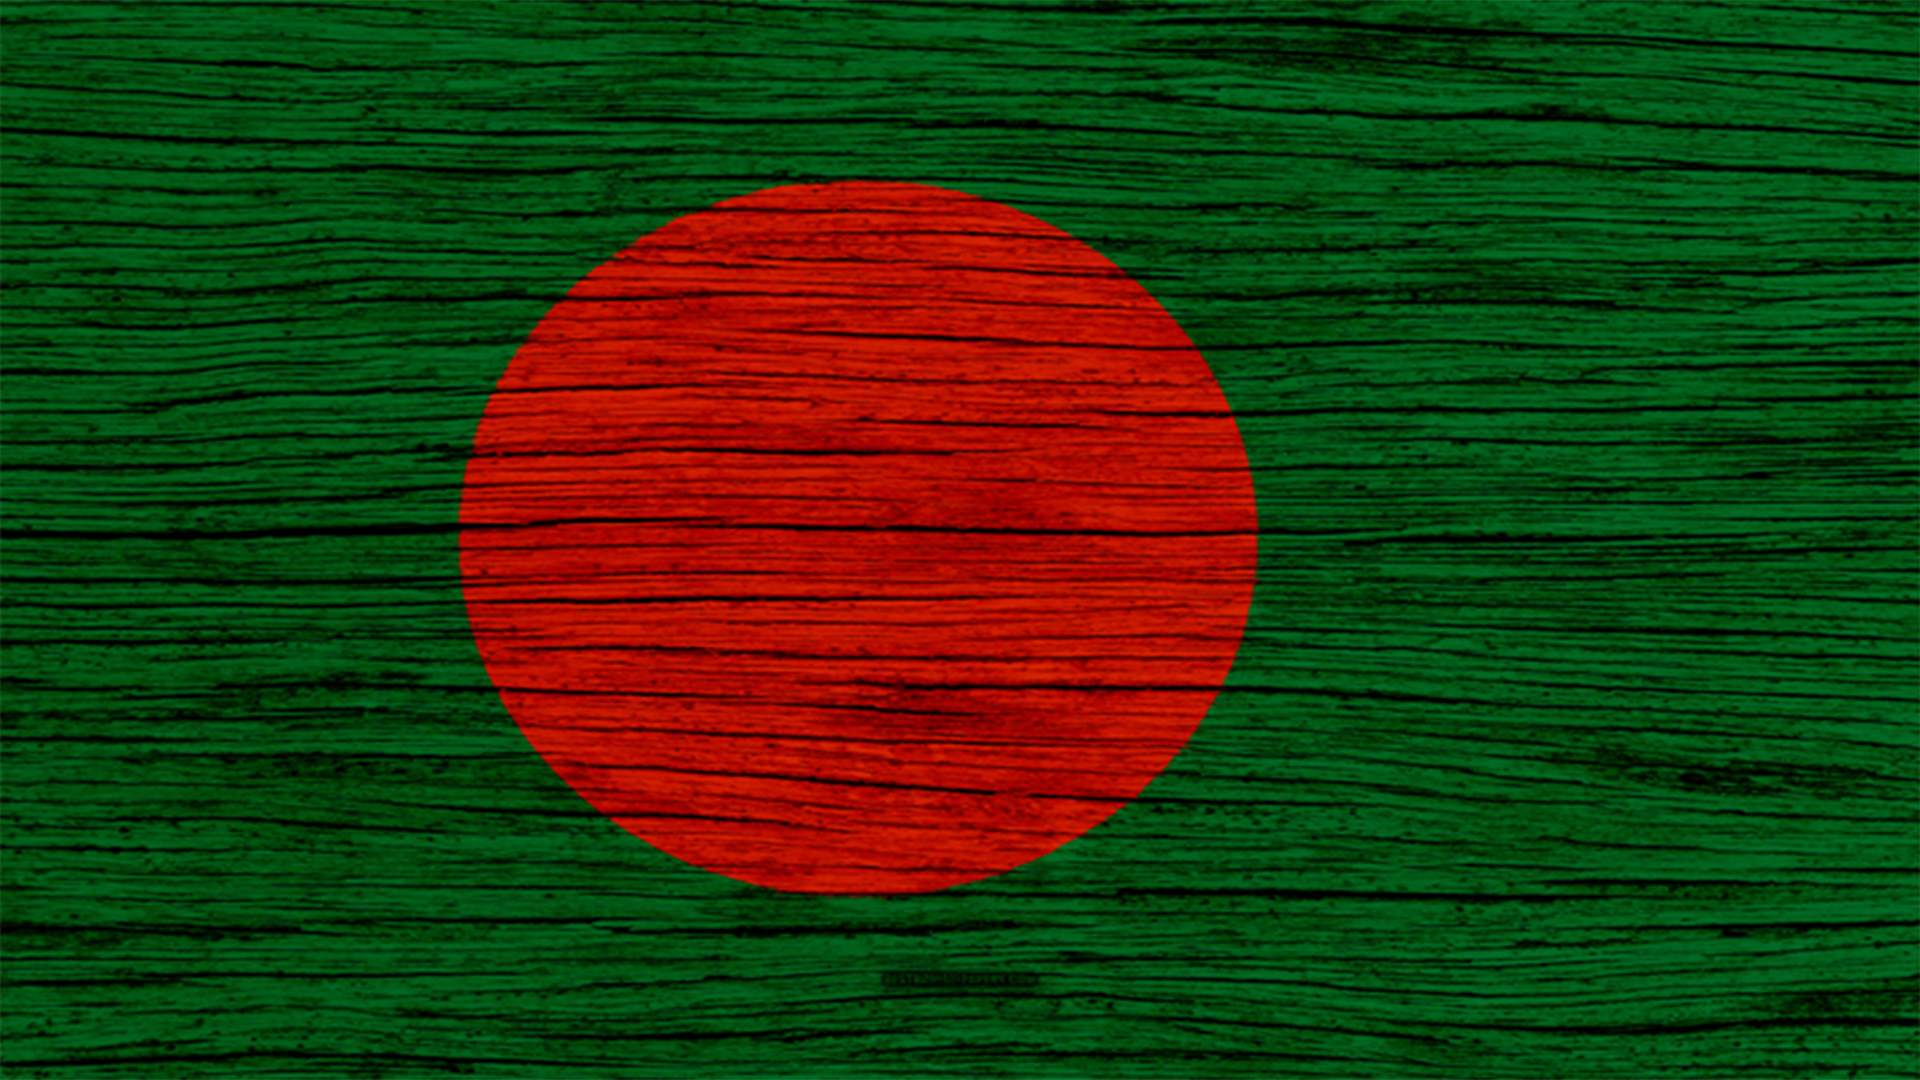 Bangladesh Flag Images, Pictures & HD Wallpapers